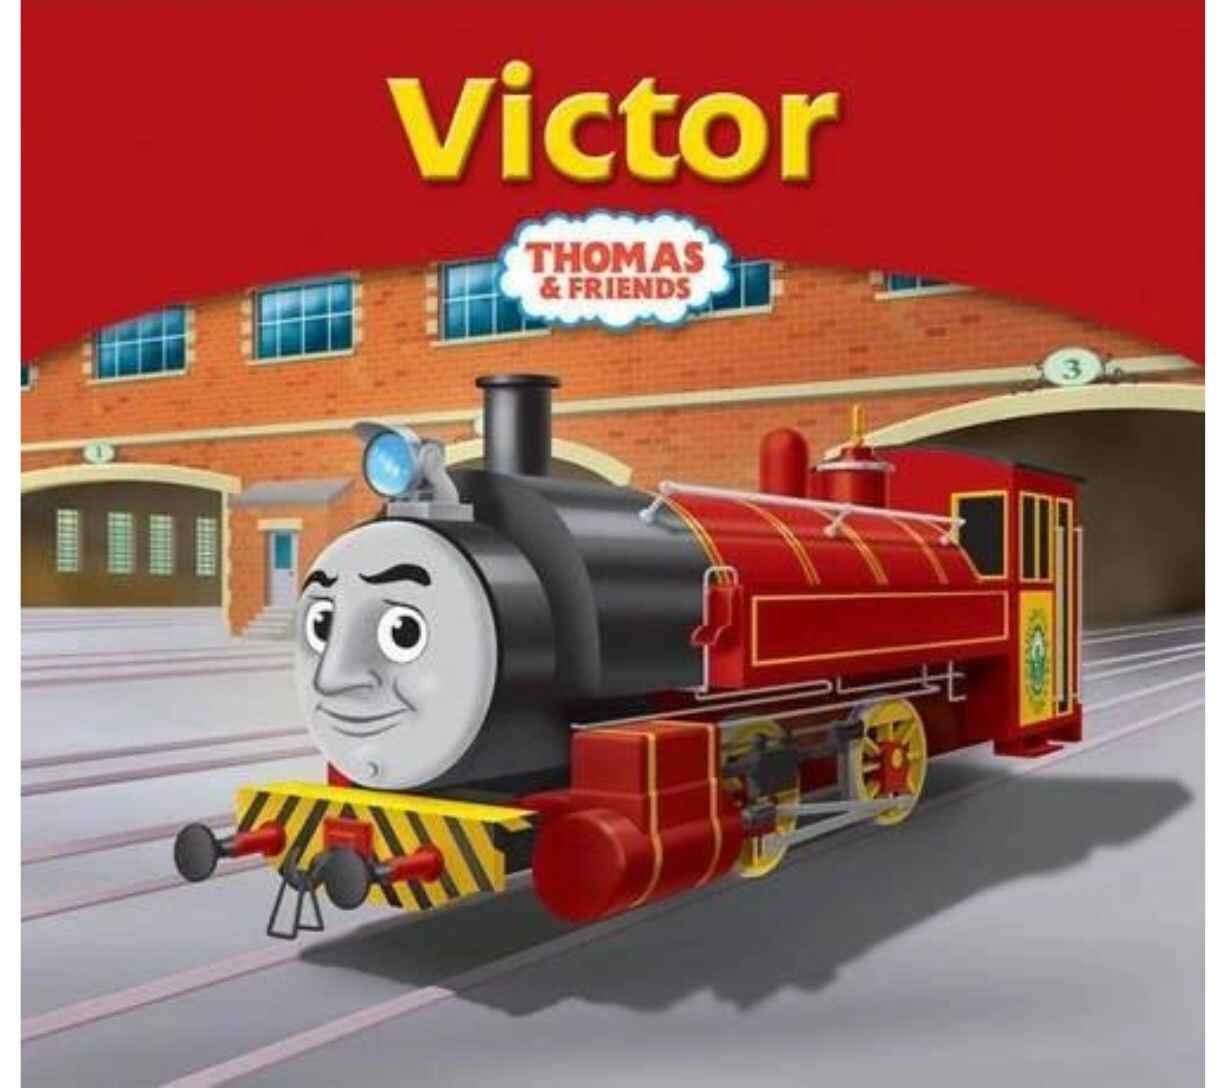 Thomas and Friends - Victor